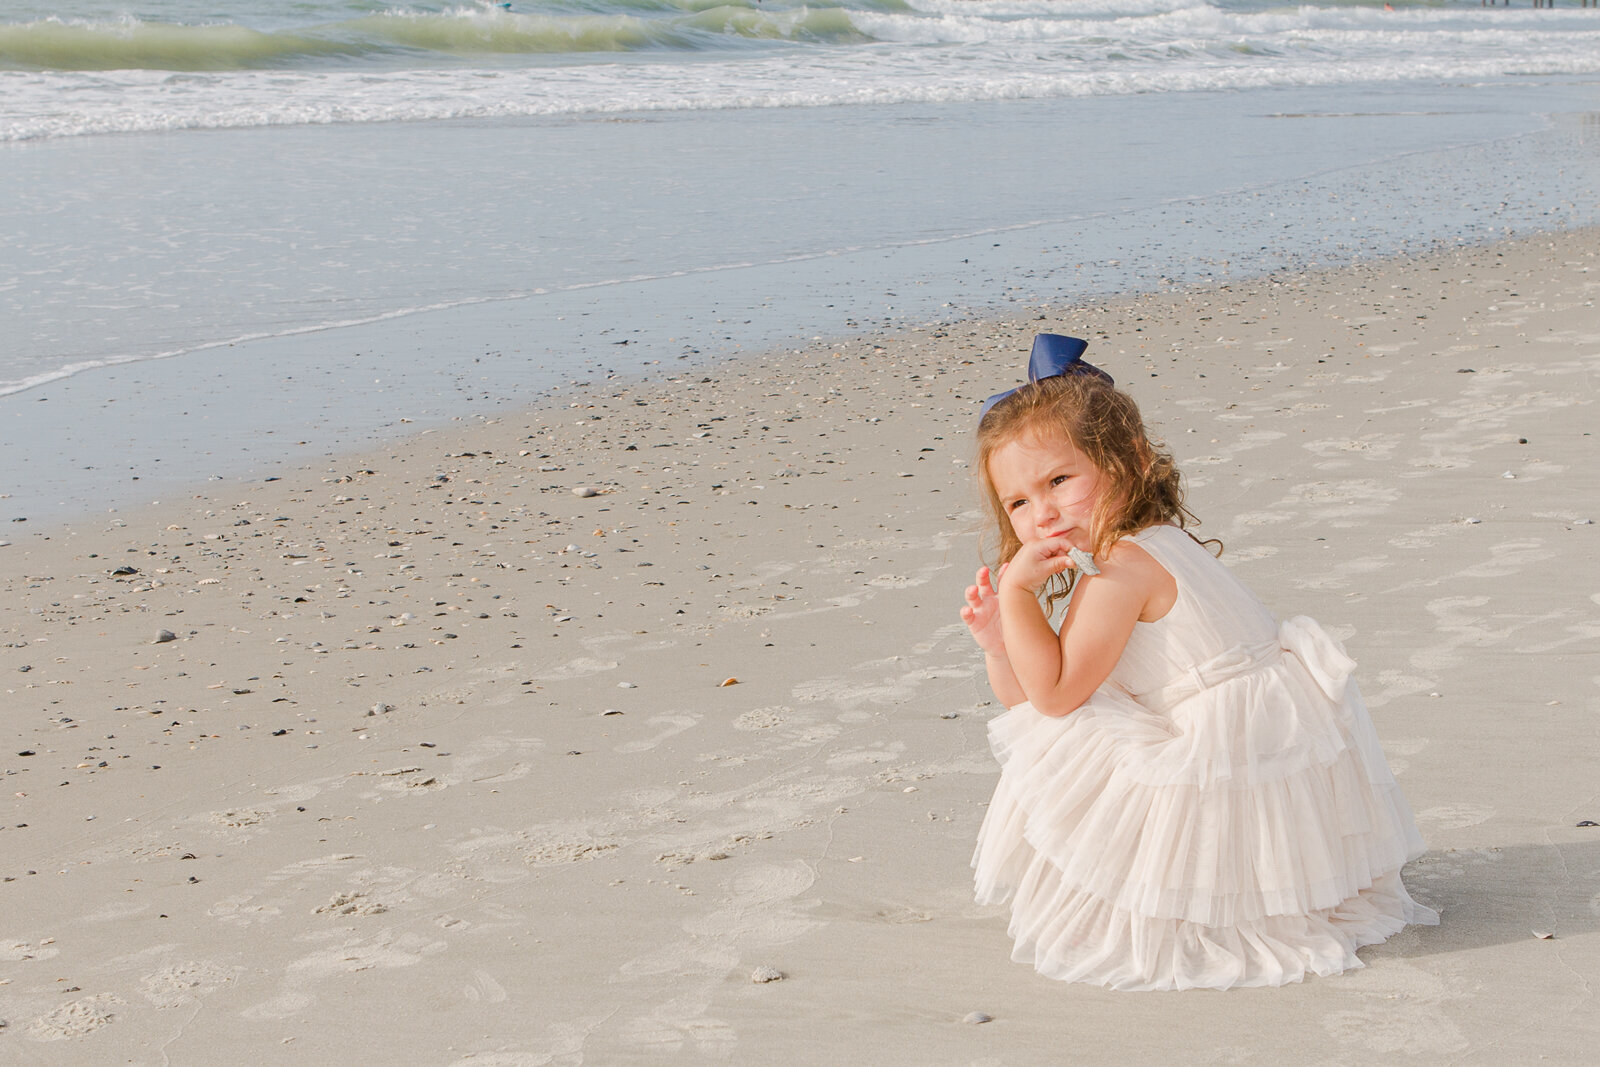 Early Easter morning children's beach photography.  Little girl wearing Easter dress on beach with Ron Schroll Photography at Pawleys Island, SC